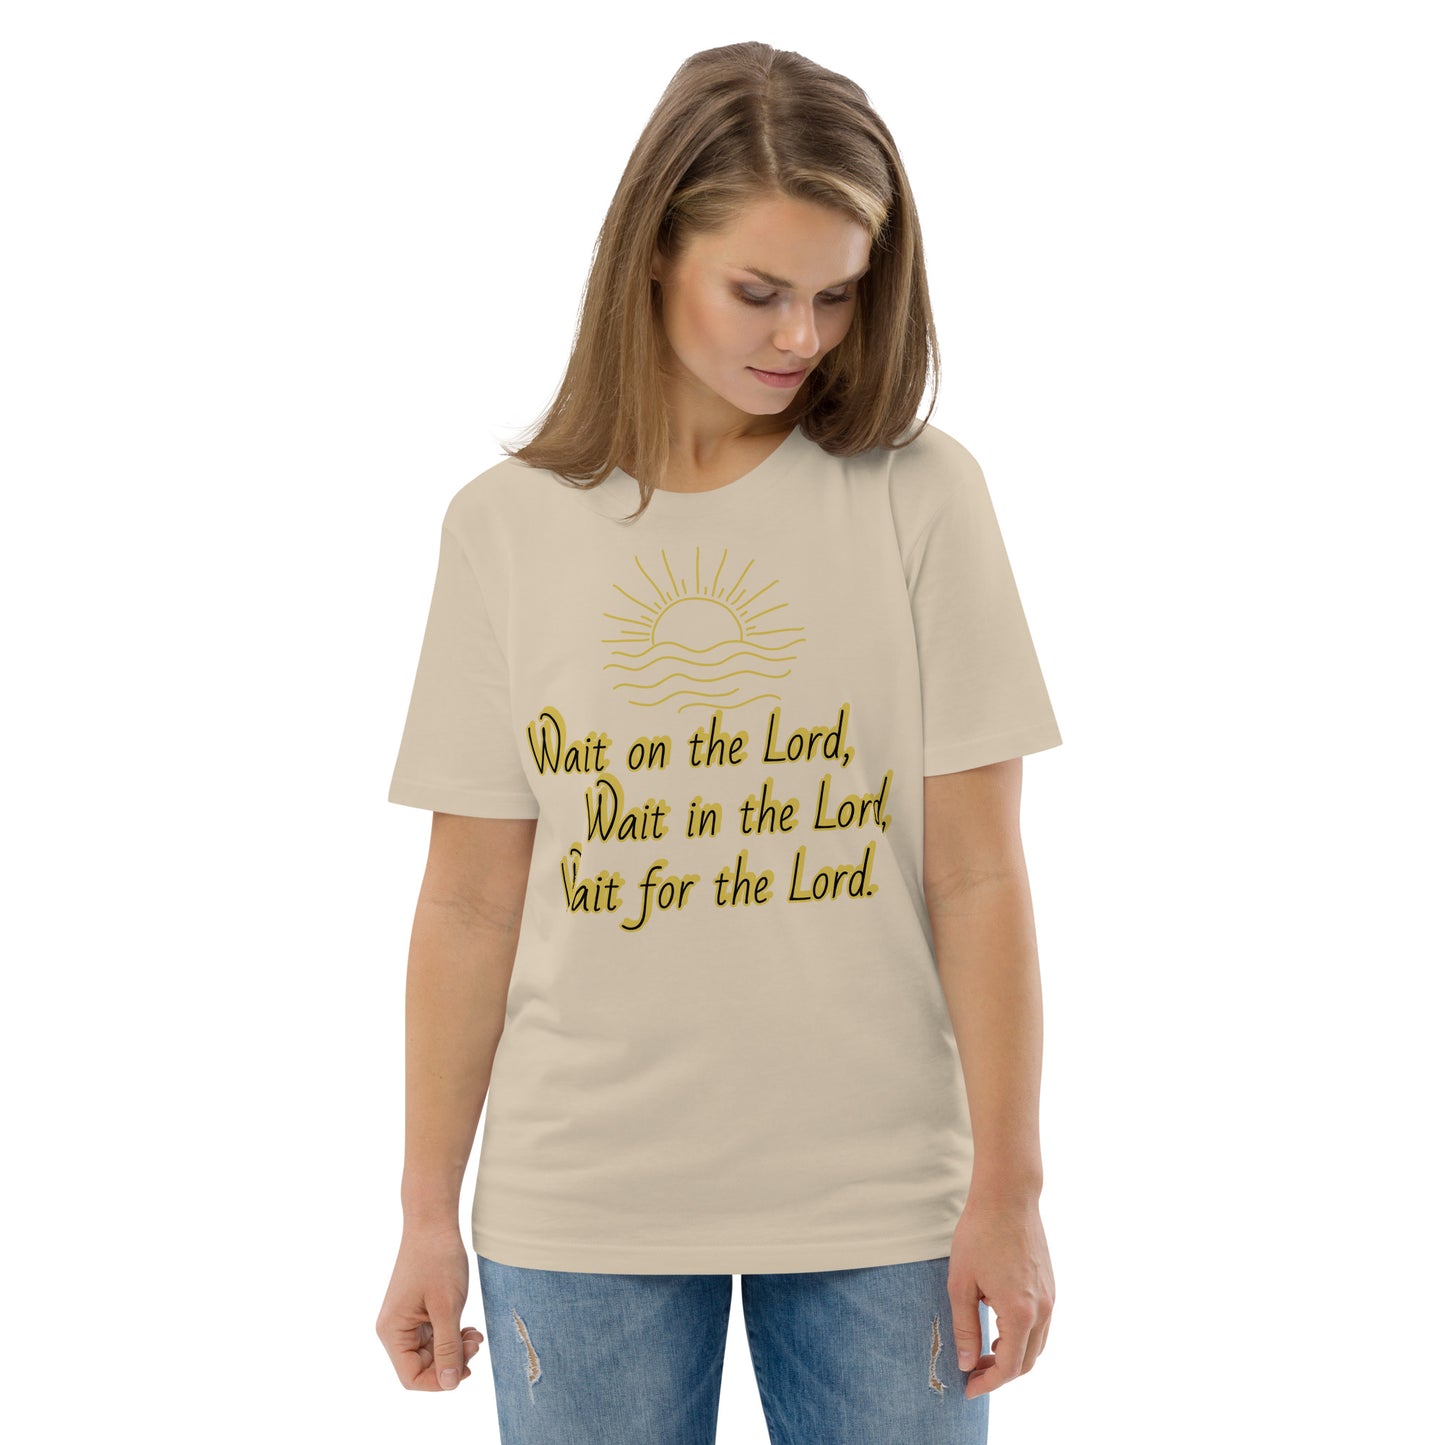 "Wait on the Lord" Unisex Org. Tee